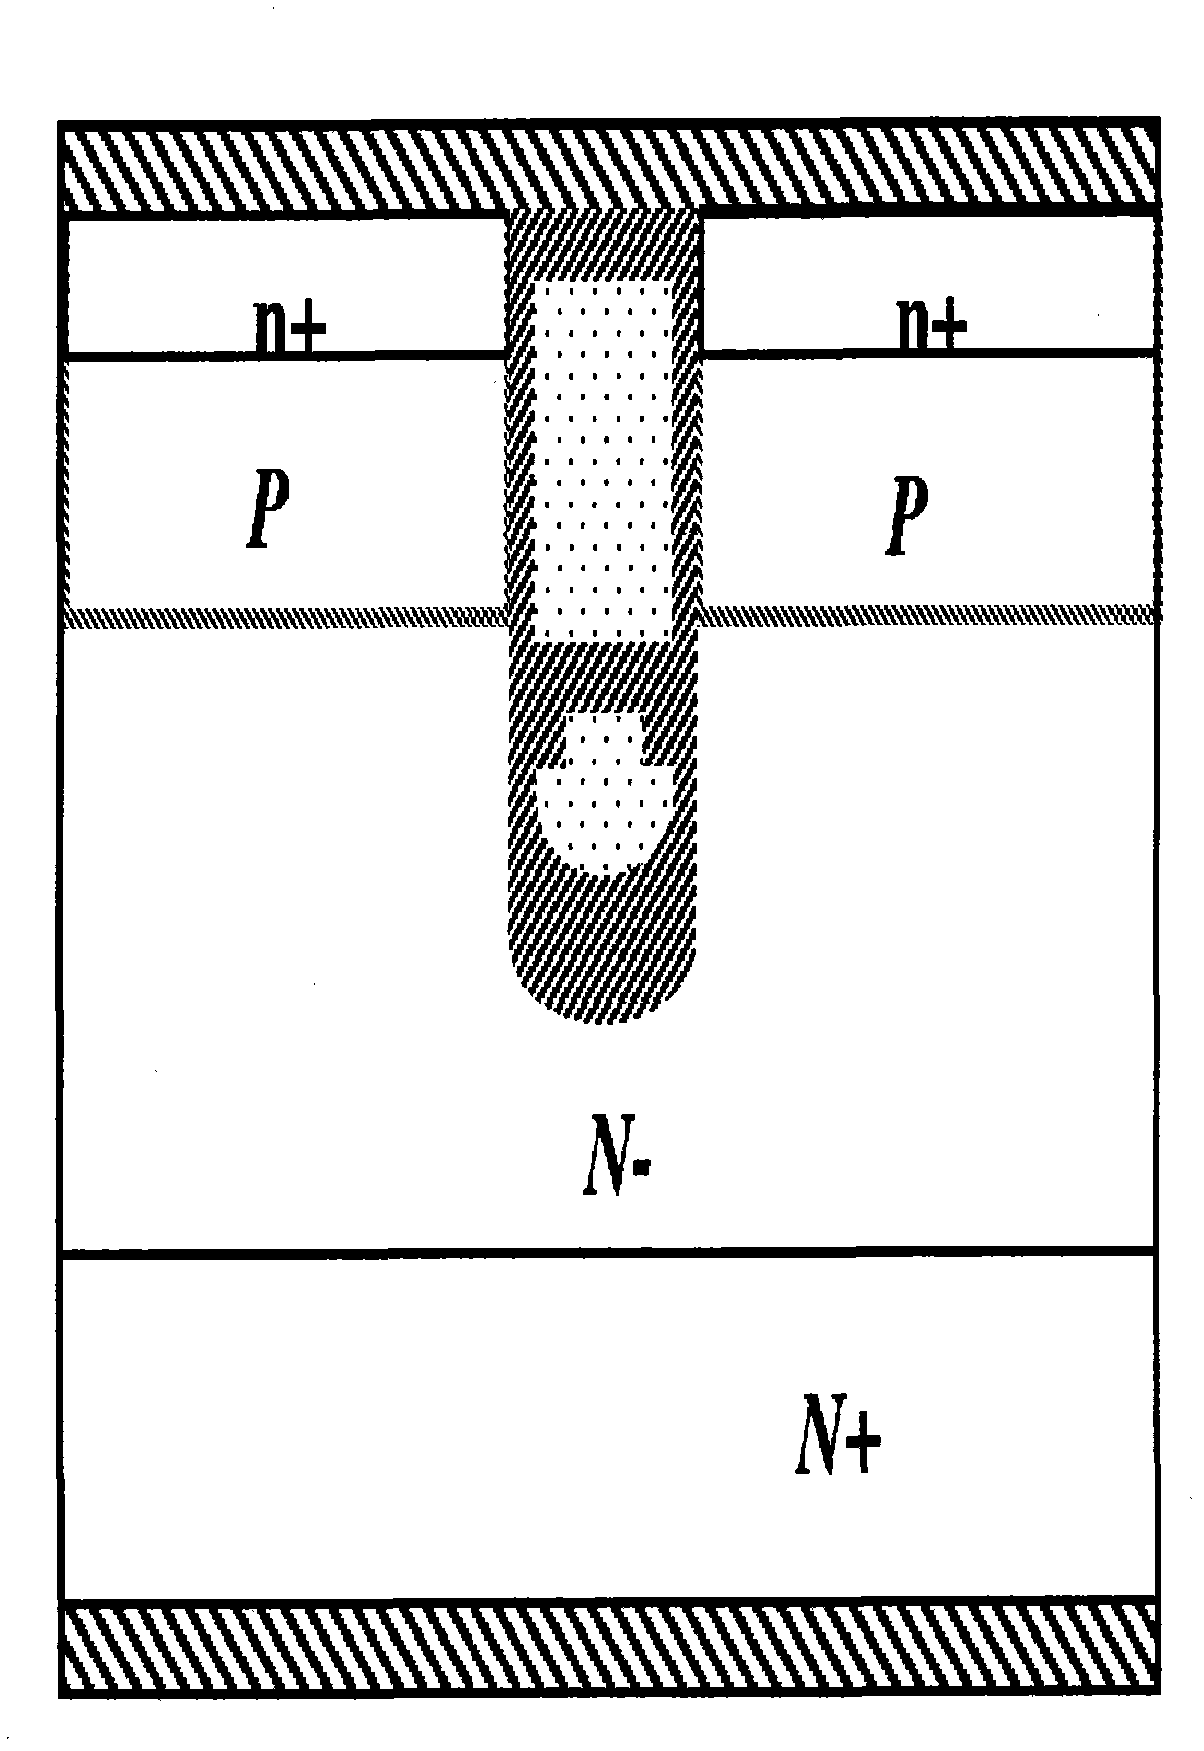 Semiconductor device structures and related processes